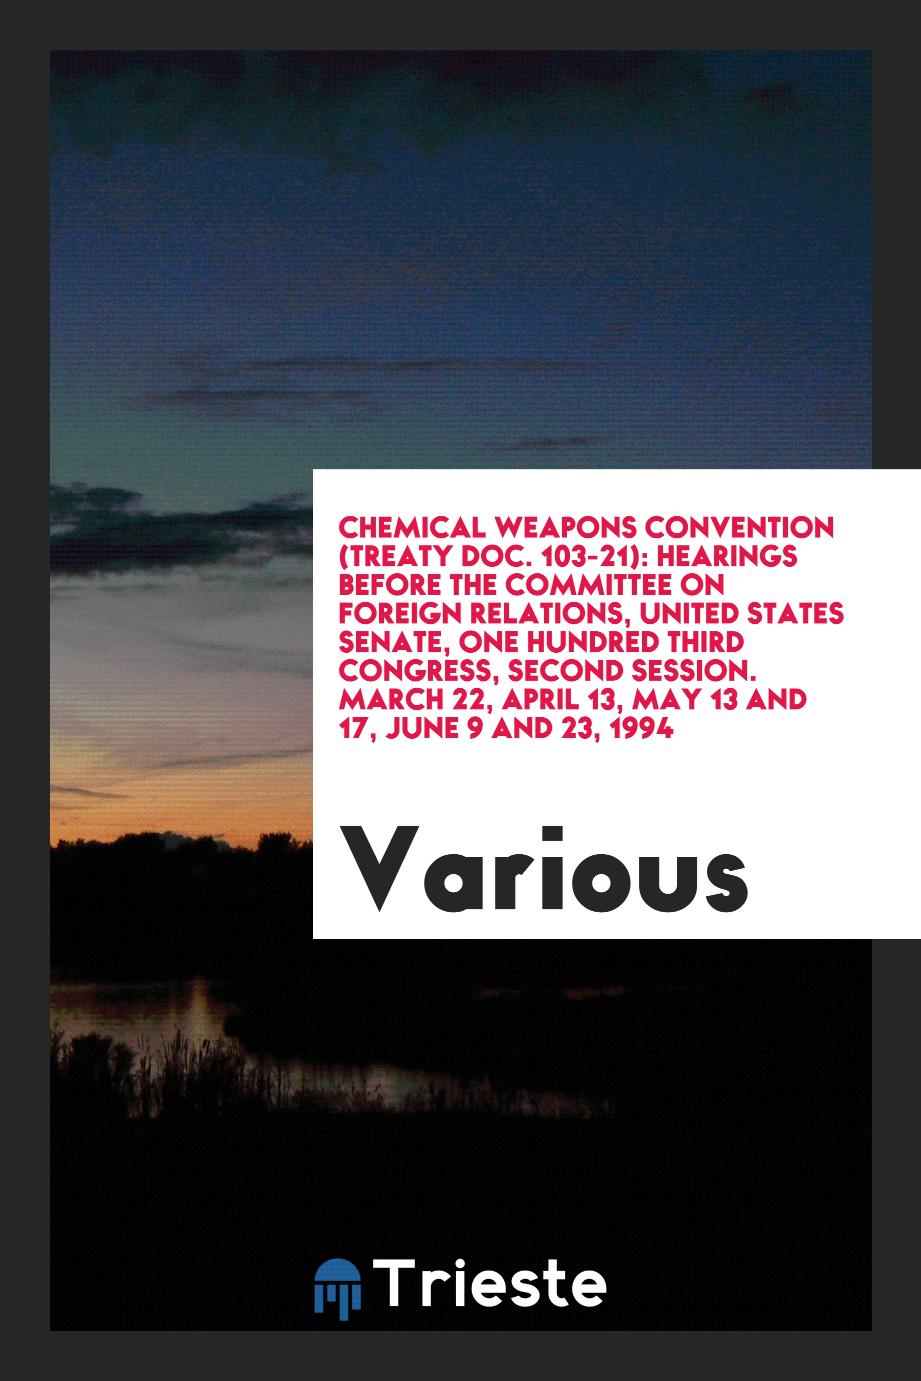 Chemical Weapons Convention (Treaty doc. 103-21): hearings before the Committee on Foreign Relations, United States Senate, One Hundred Third Congress, second session. March 22, April 13, May 13 and 17, June 9 and 23, 1994